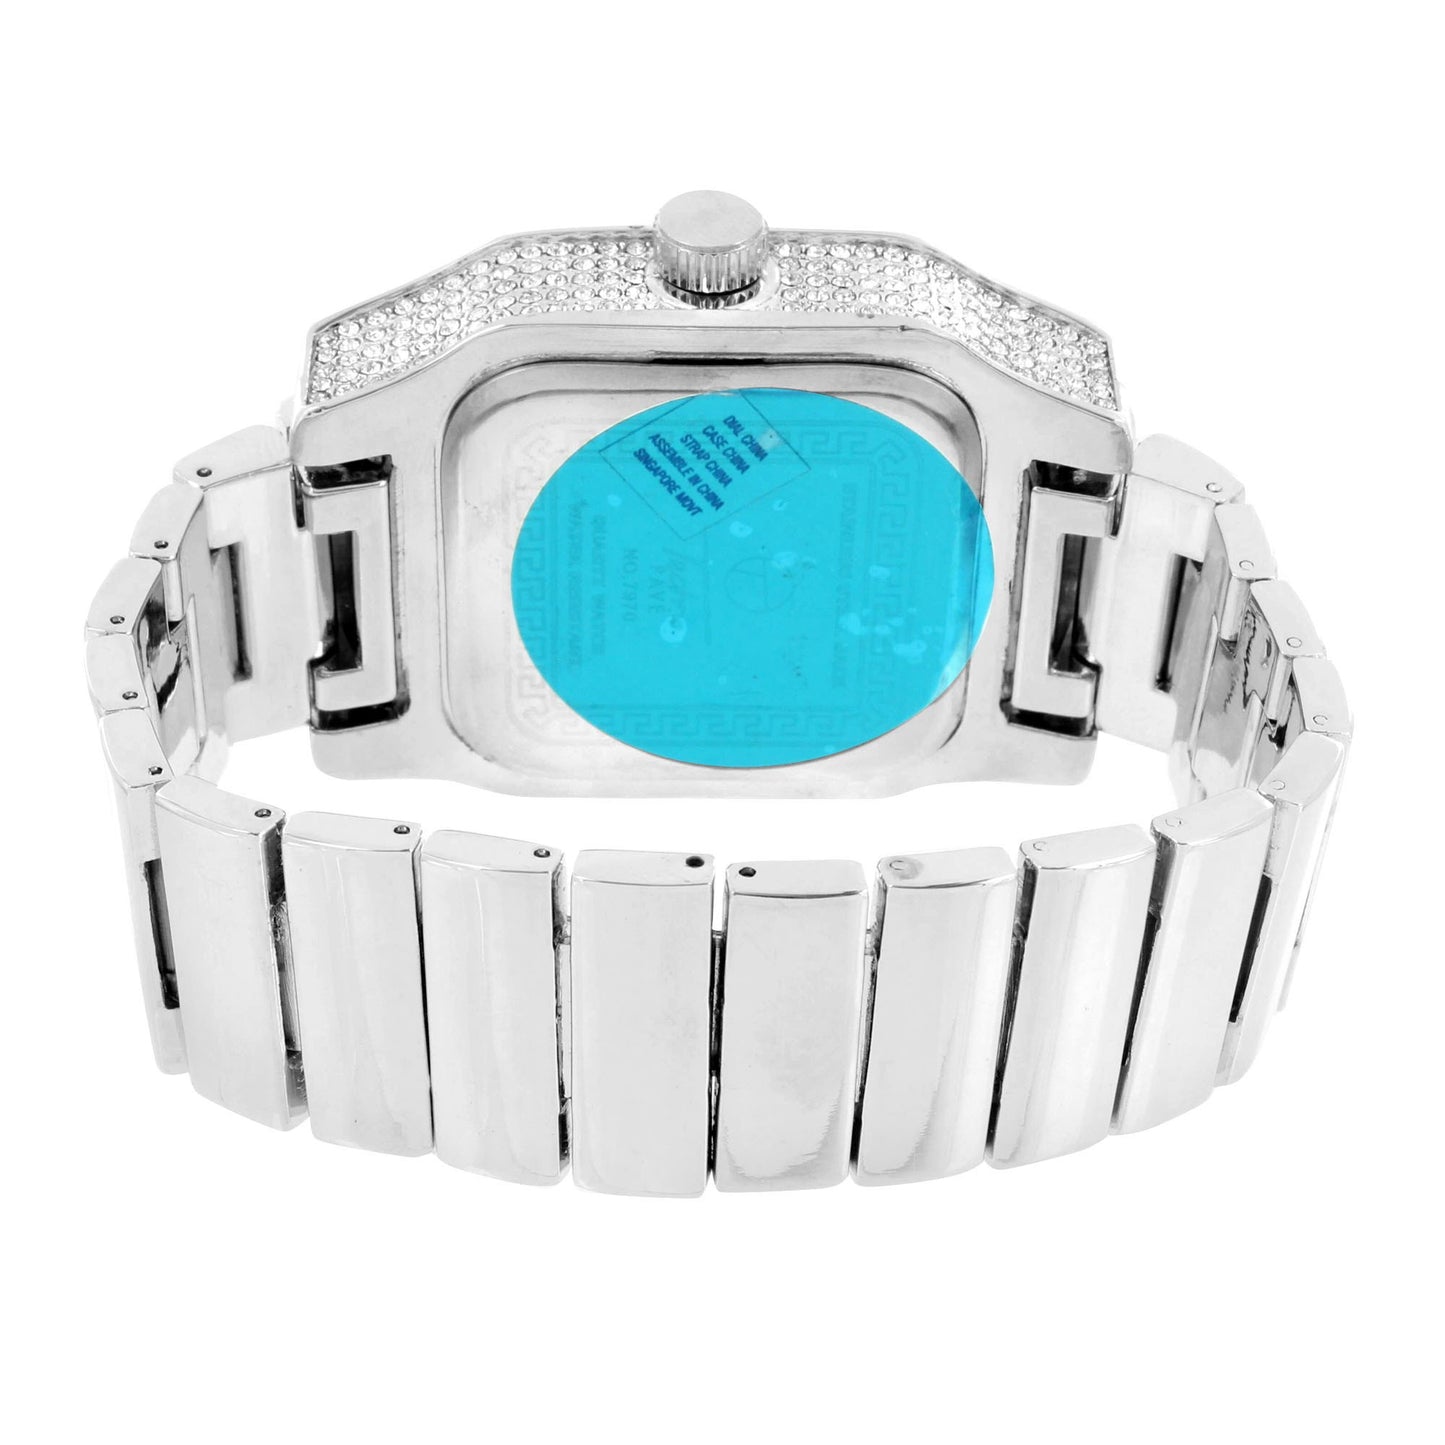 Silver Tone Watch Stretch Band Square Face